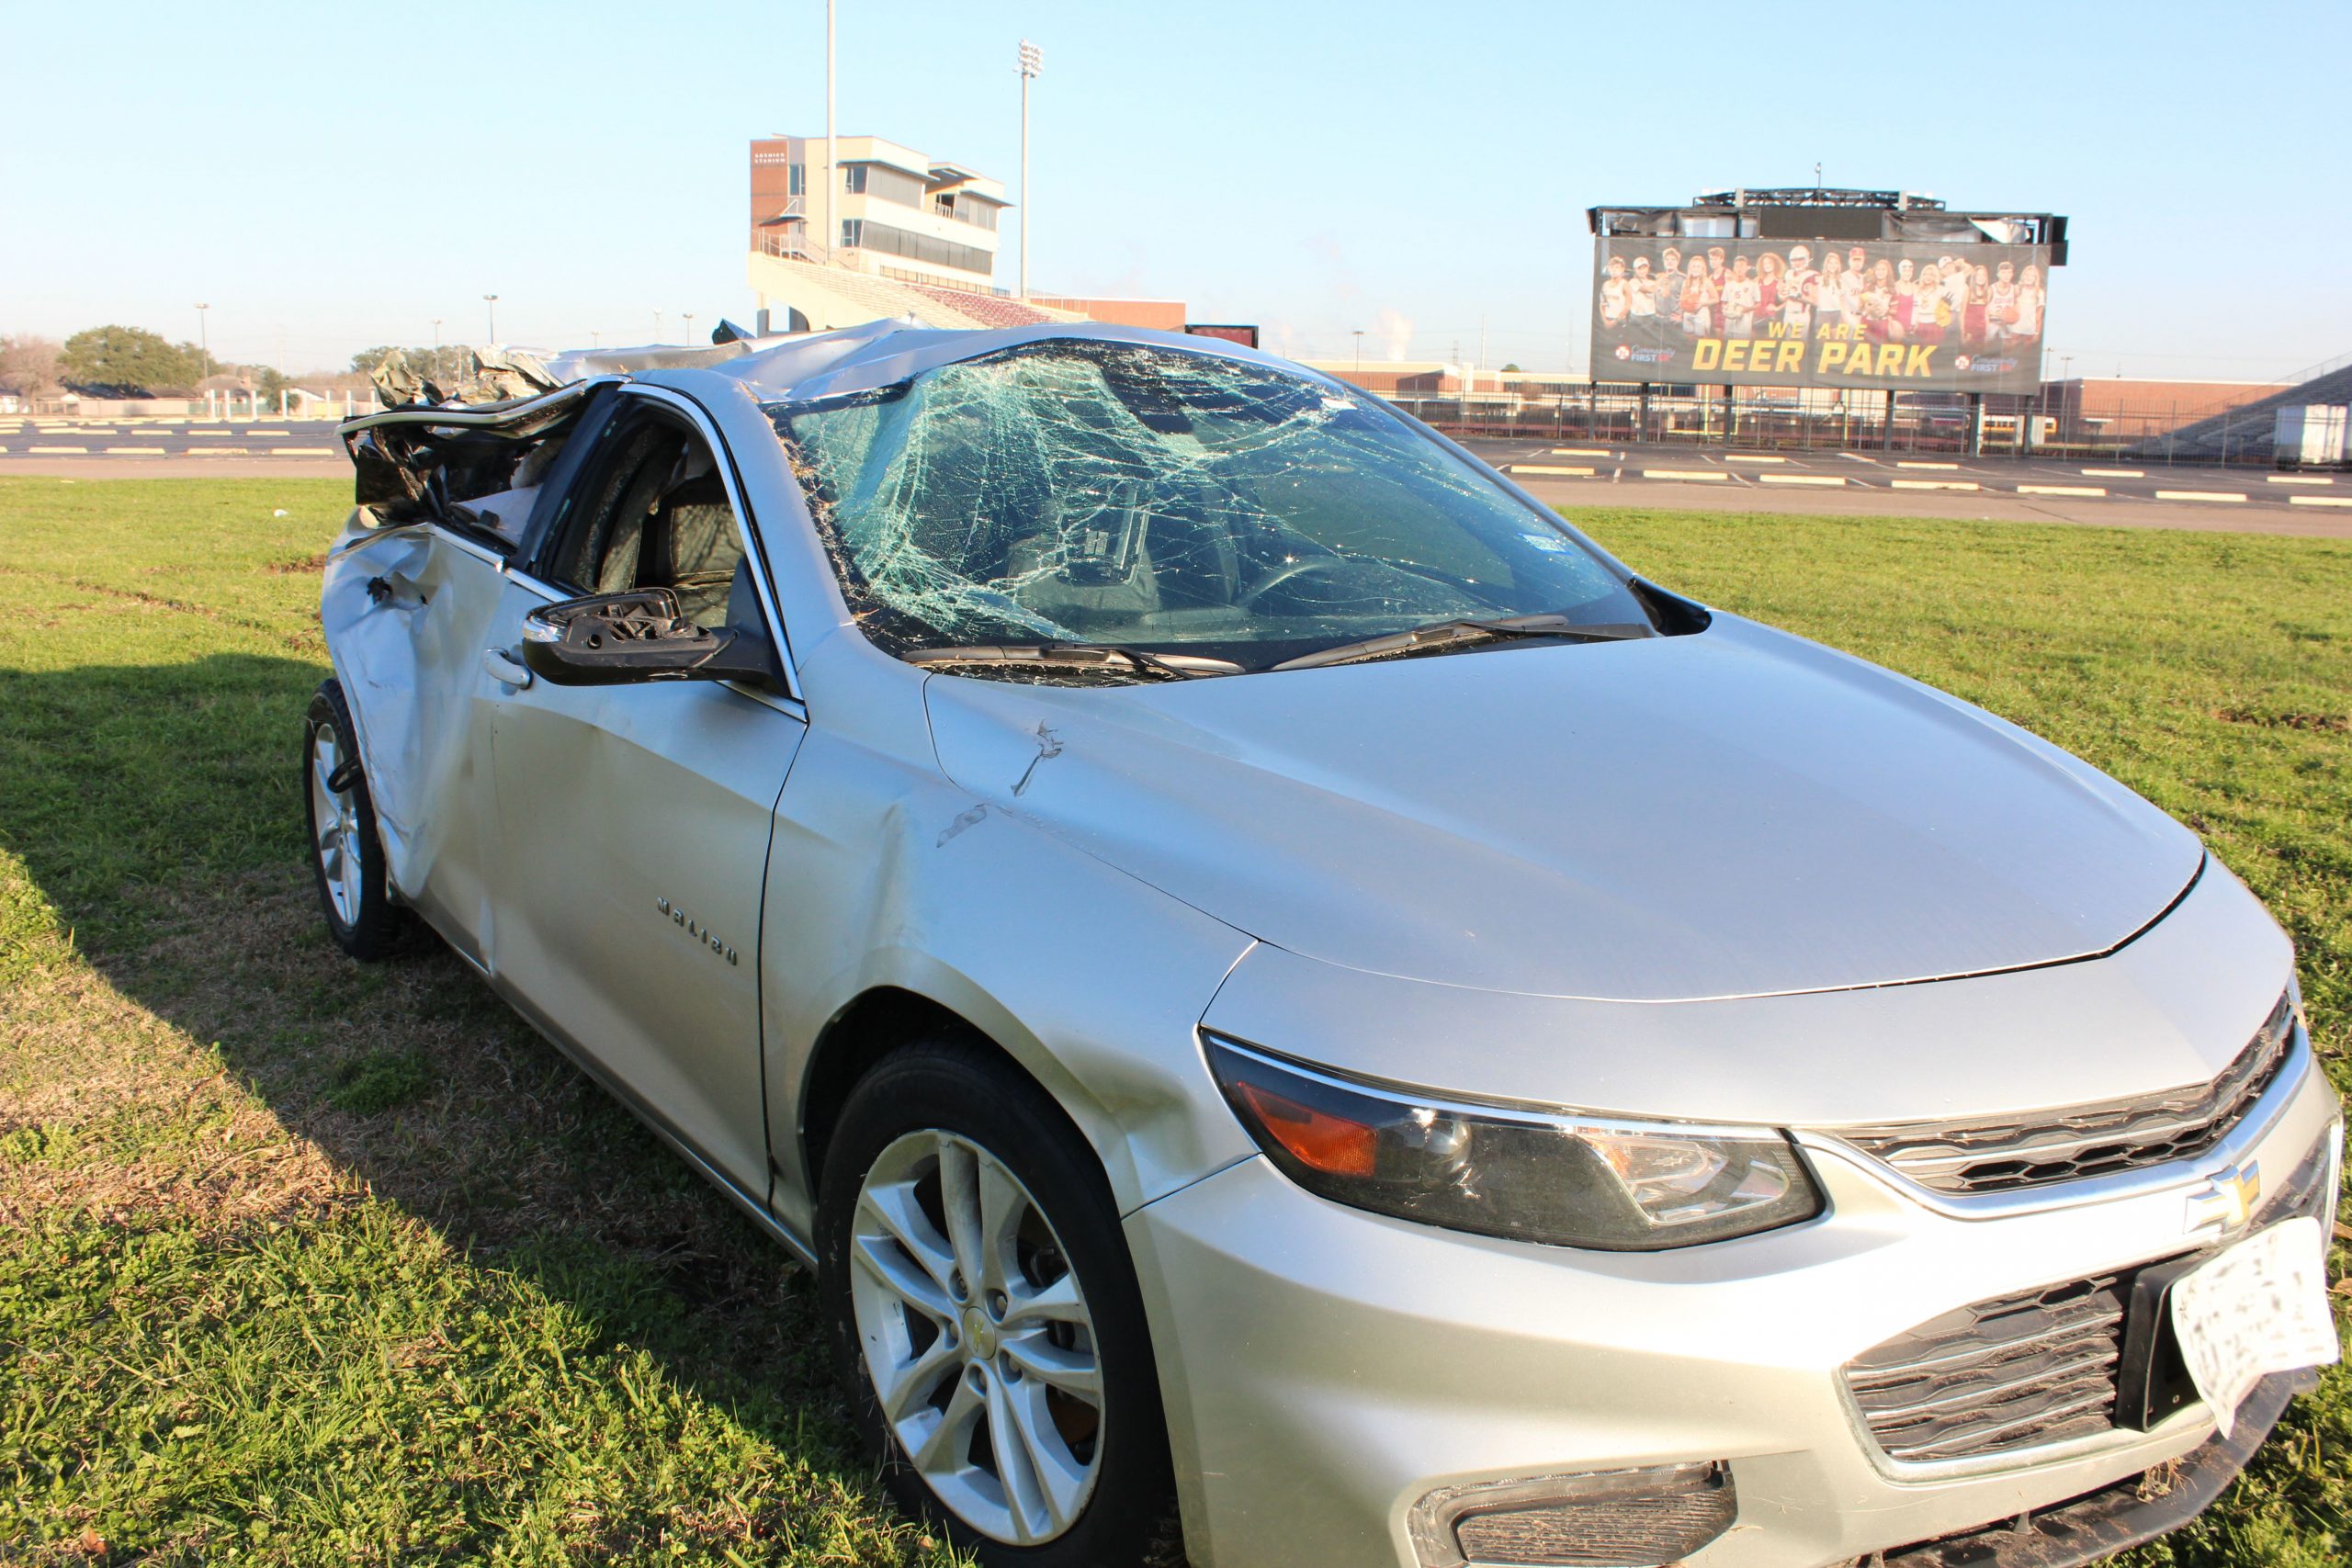 A car that was picked up by a tornado and dropped in a field near Deer Park high school's football stadium. A big sign with the football team on it in the back that says "We are Deer Park"